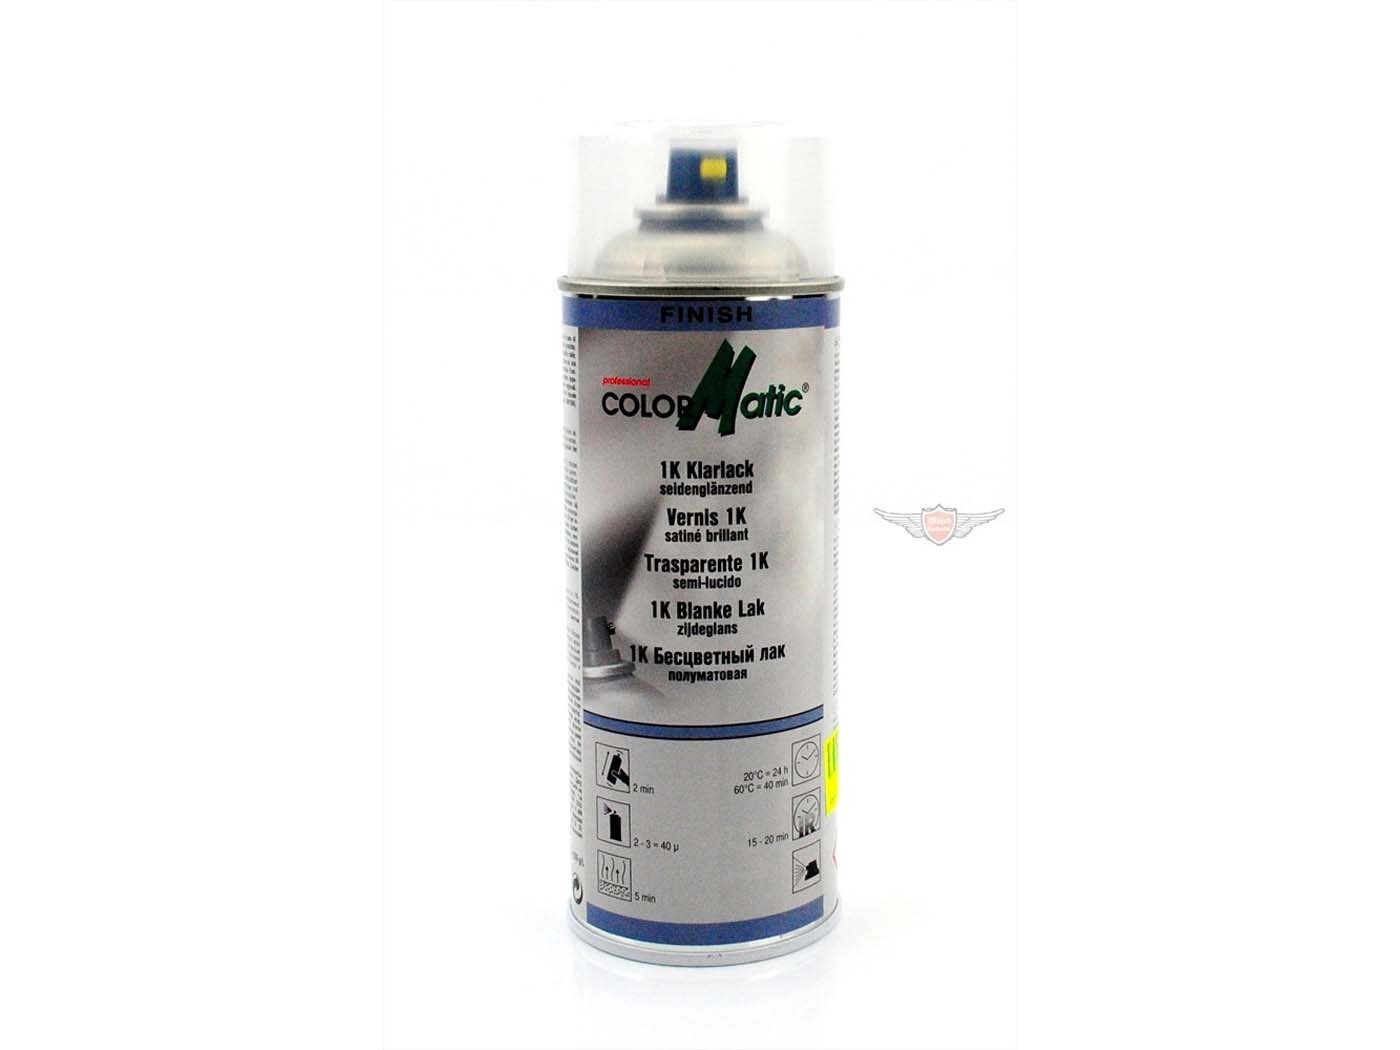 Moped Moped Dupli Color Clear Coat Paint Spray Can 400ml